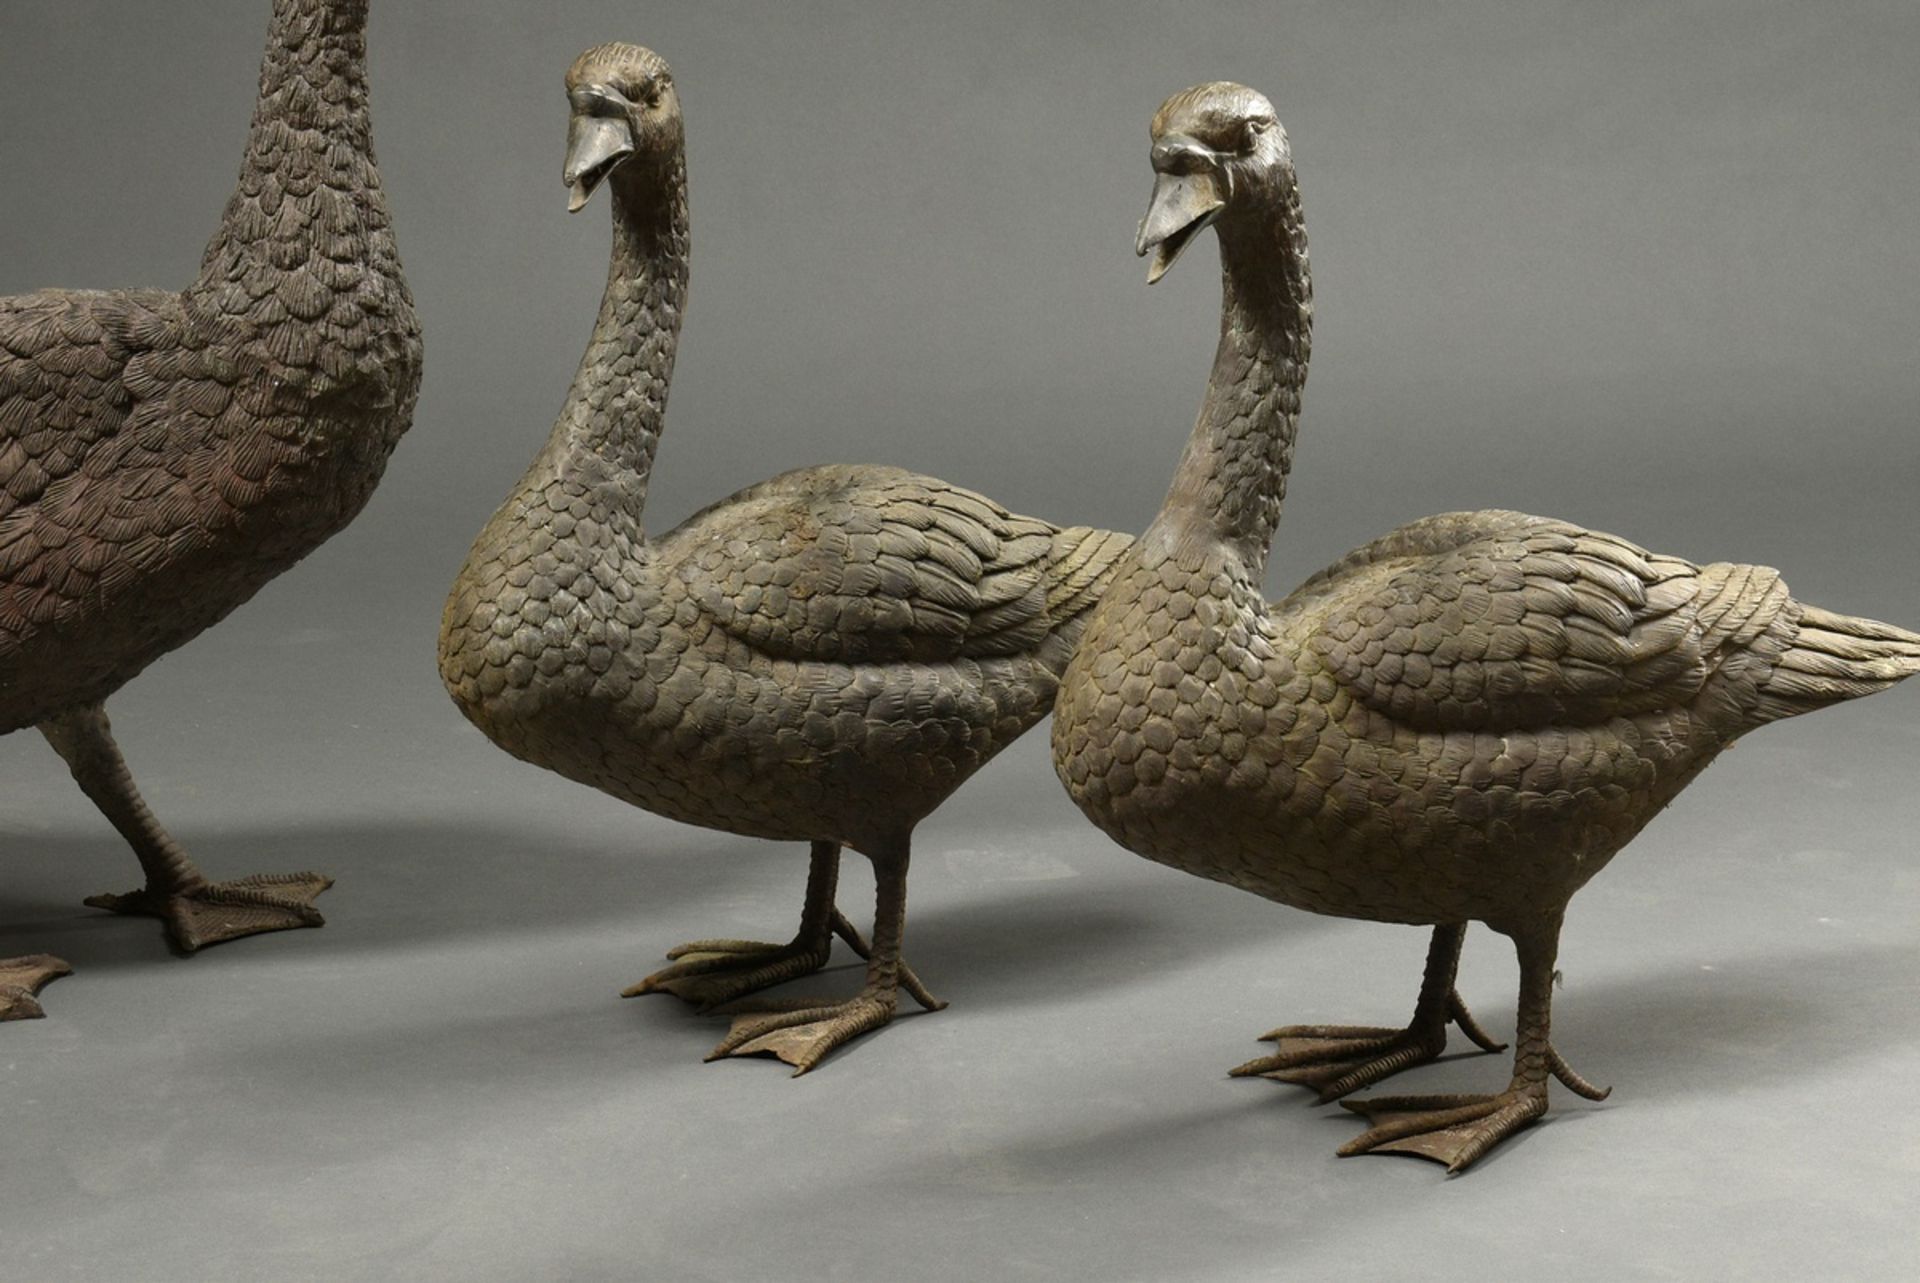 3 Bronze sculptures "Hump-backed swan with 2 young swans", h. 49/51/75cm, signs of age - Image 3 of 6